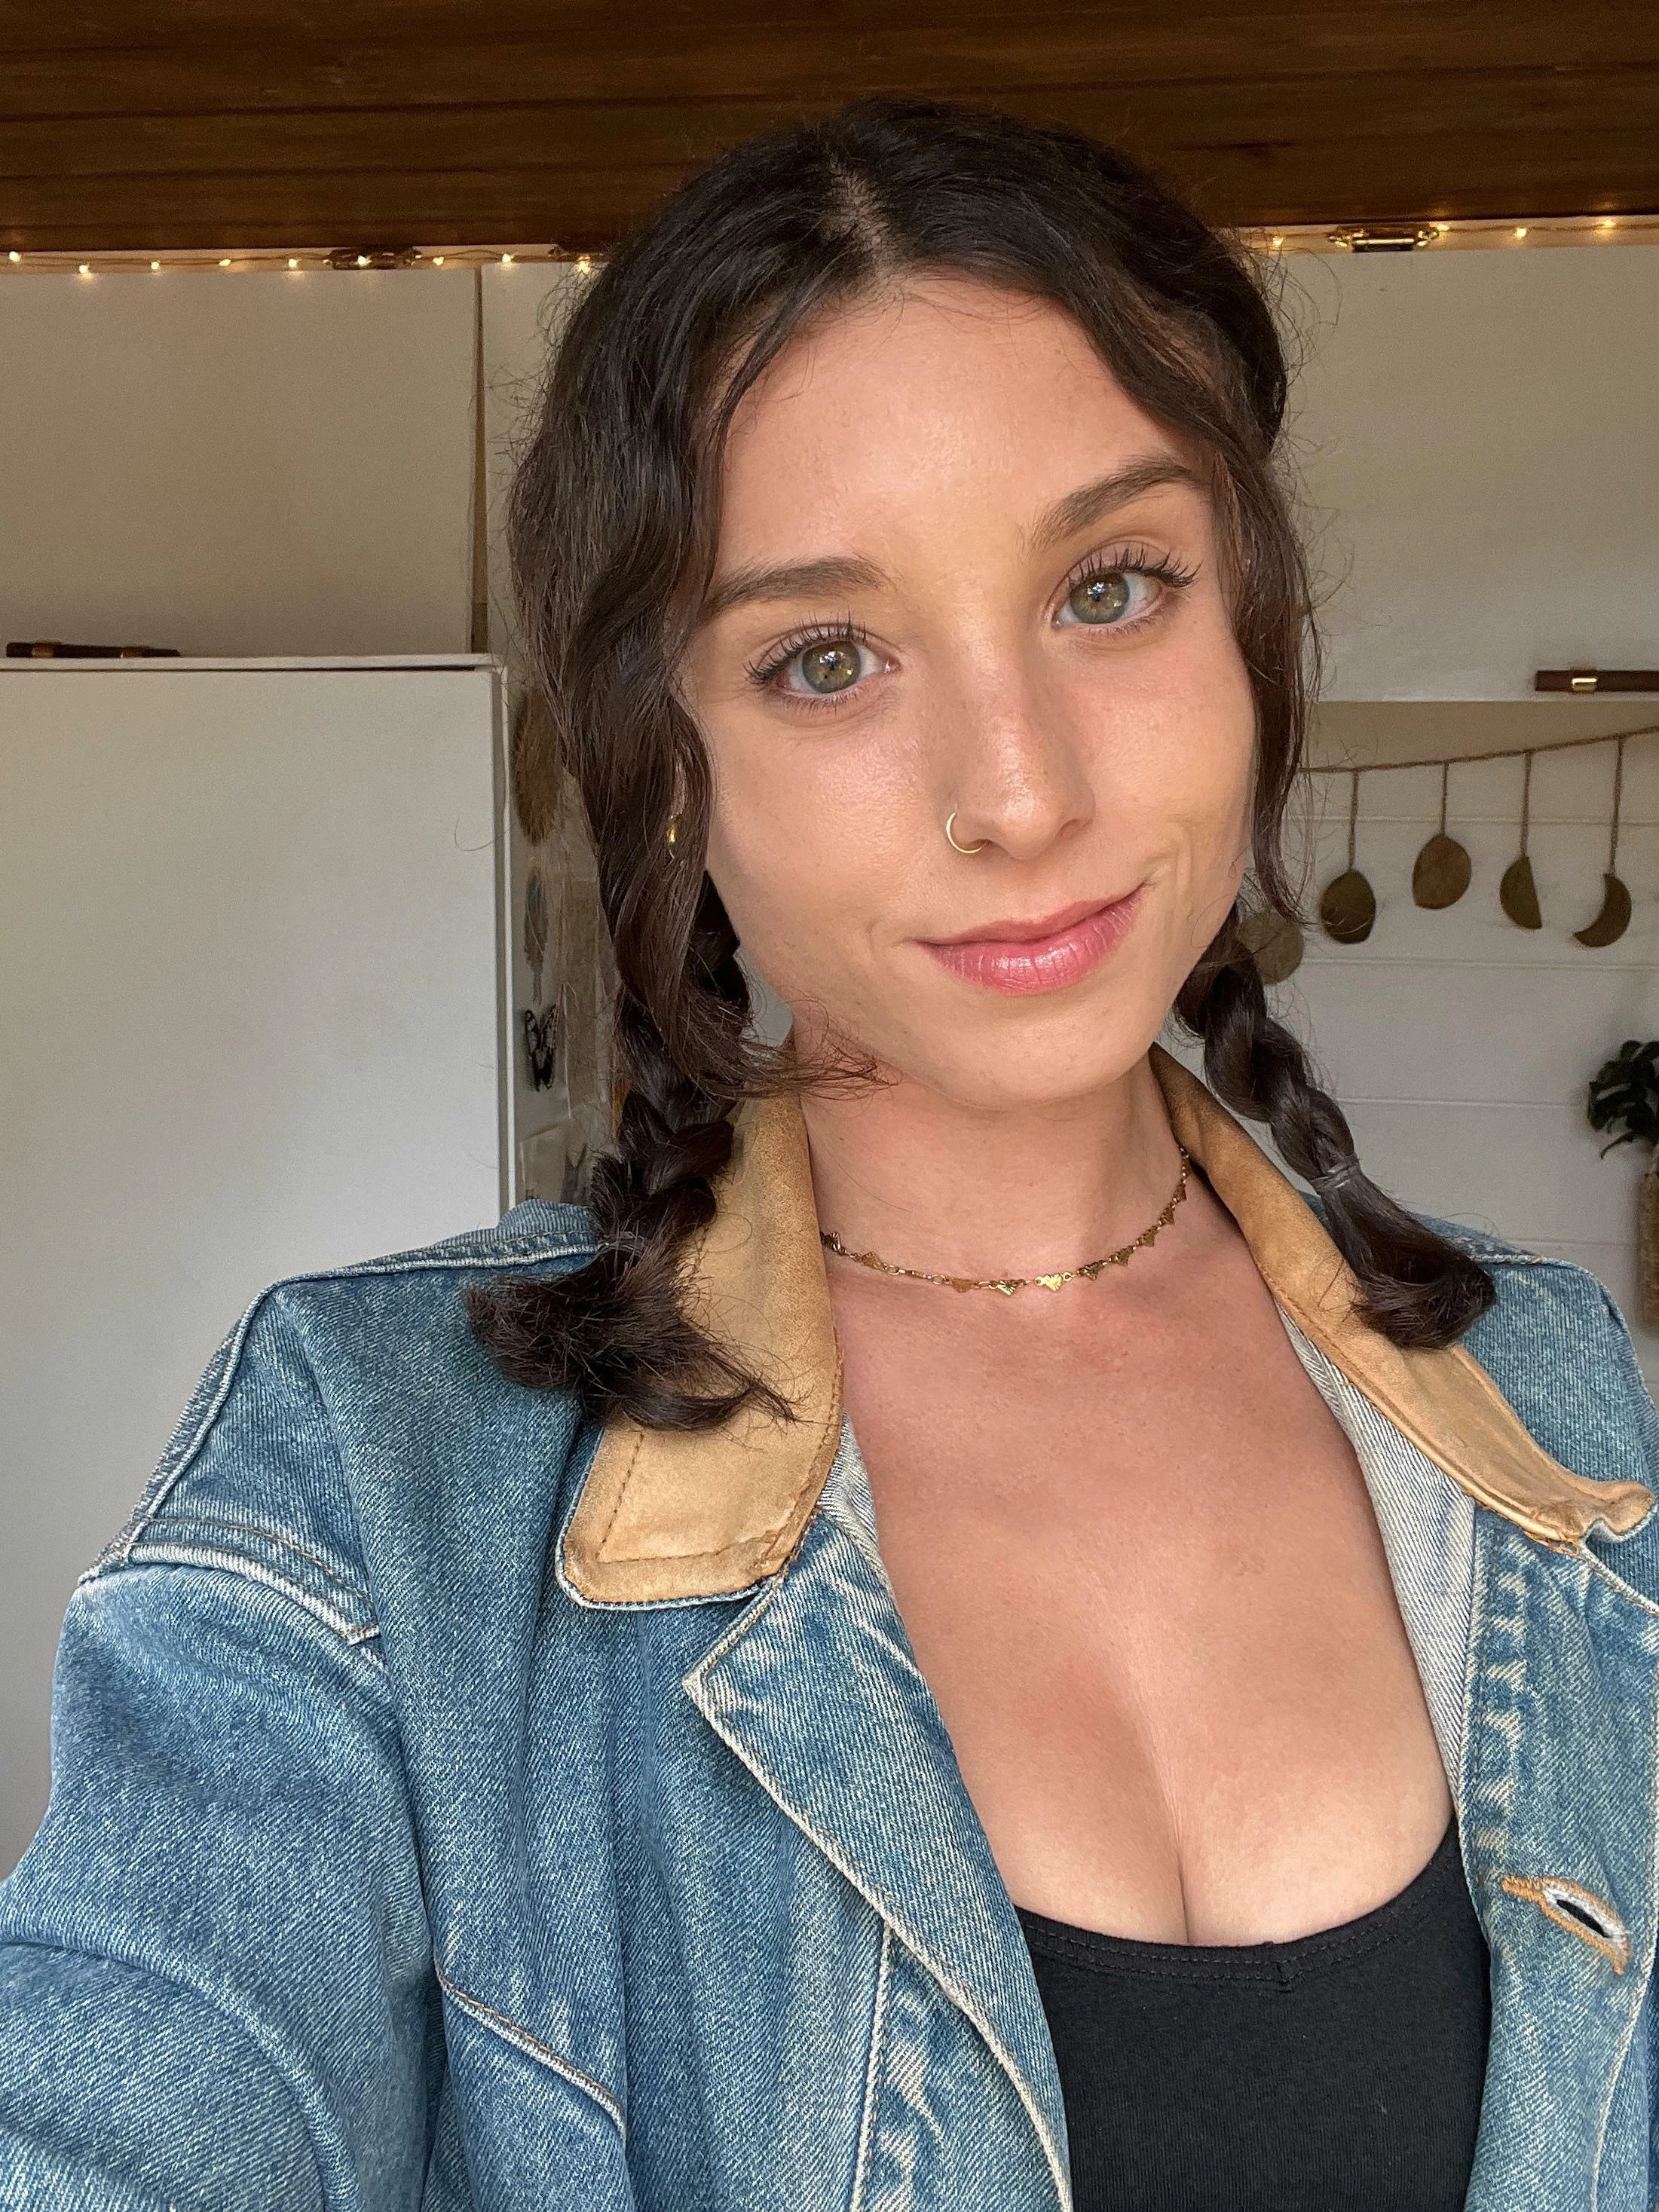 I’ve been loving putting my hair in braids recently